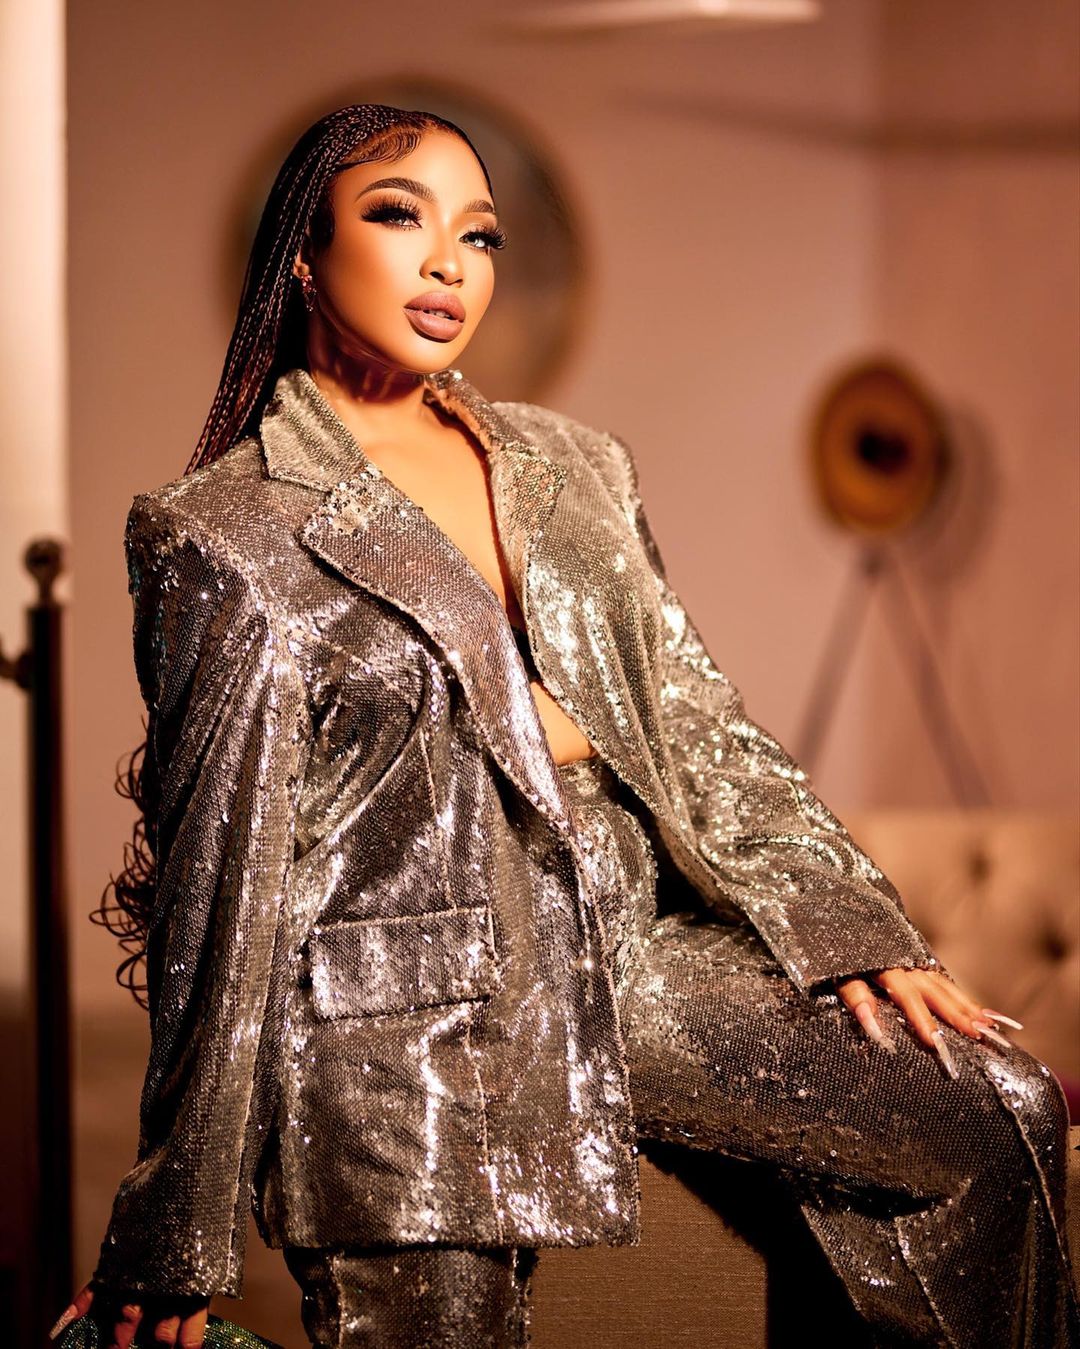 "Were you in the room, stop defending adults" - Netizens drag Stella Dimoko for defending Tonto Dikeh